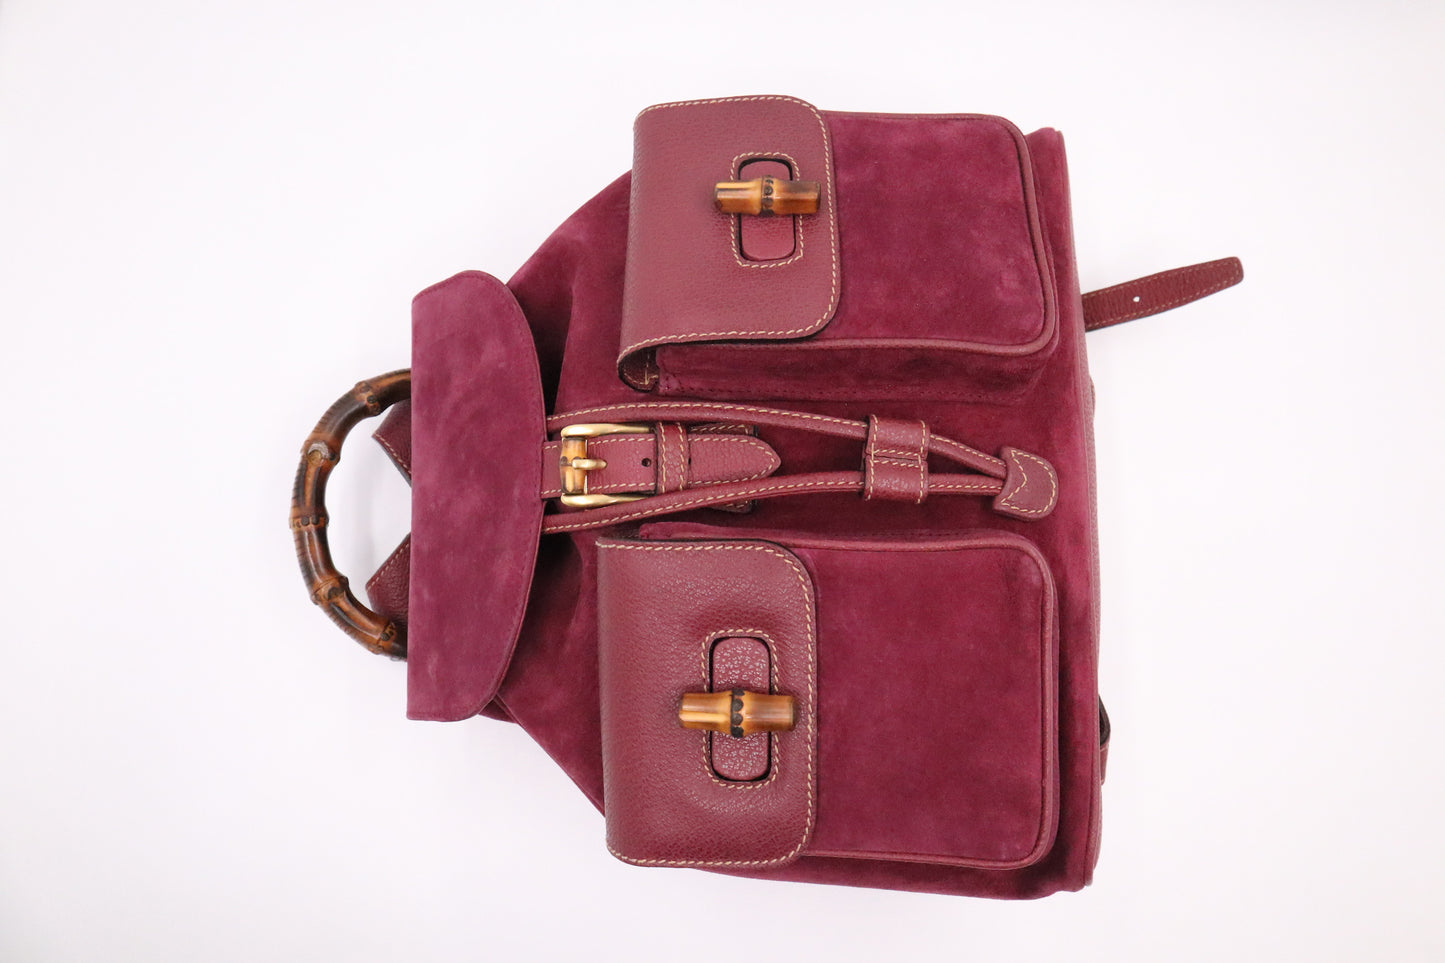 Gucci Bamboo Backpack in Purple Suede